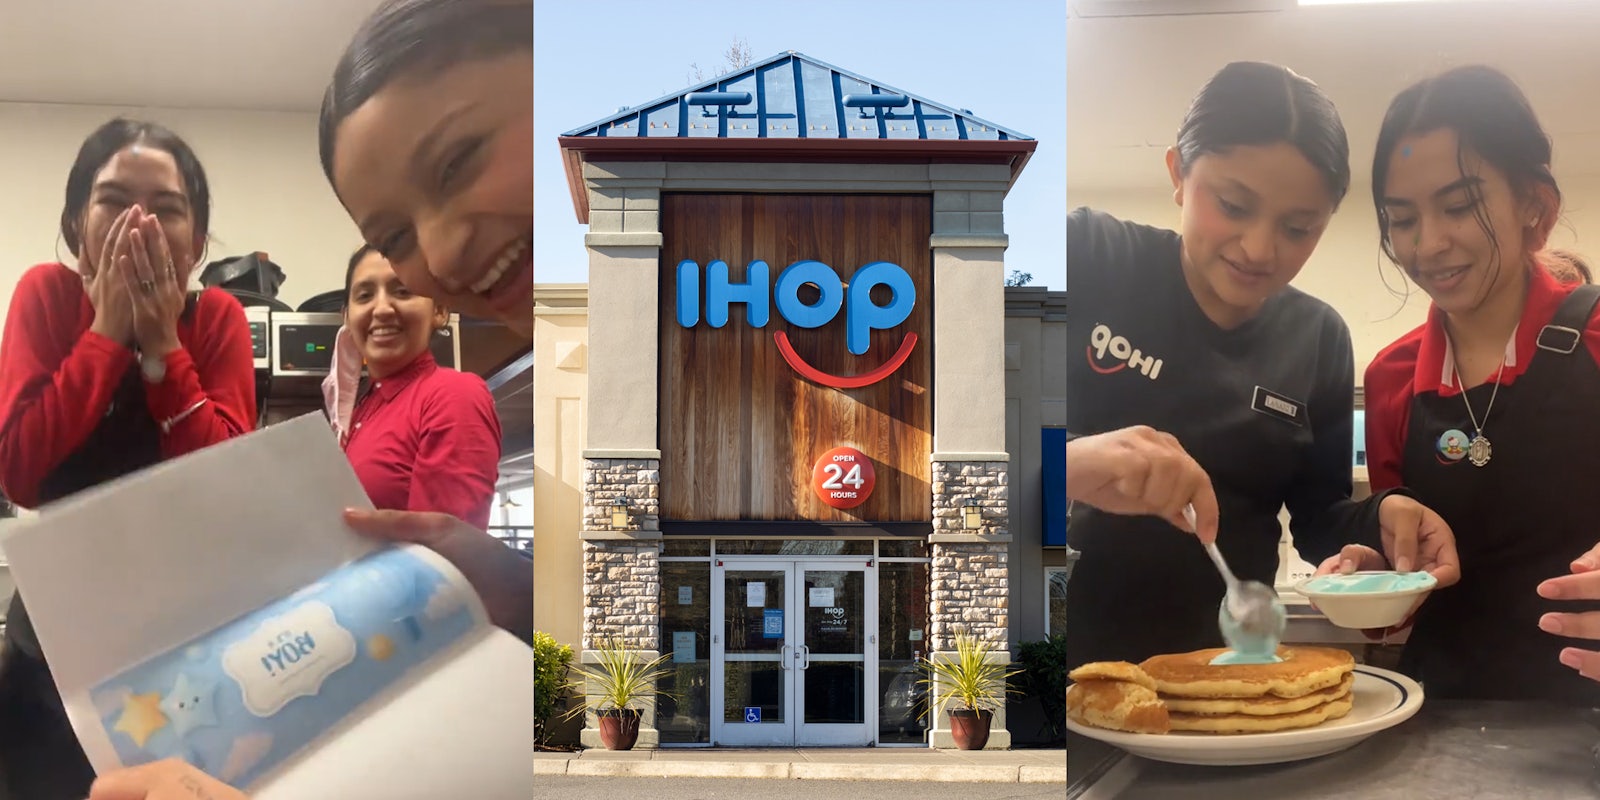 IHOP workers with 'it's a BOY' paper in hand (l) IHOP building with sign (c) IHOP workers adding blue frosting inside pancake layers (r)